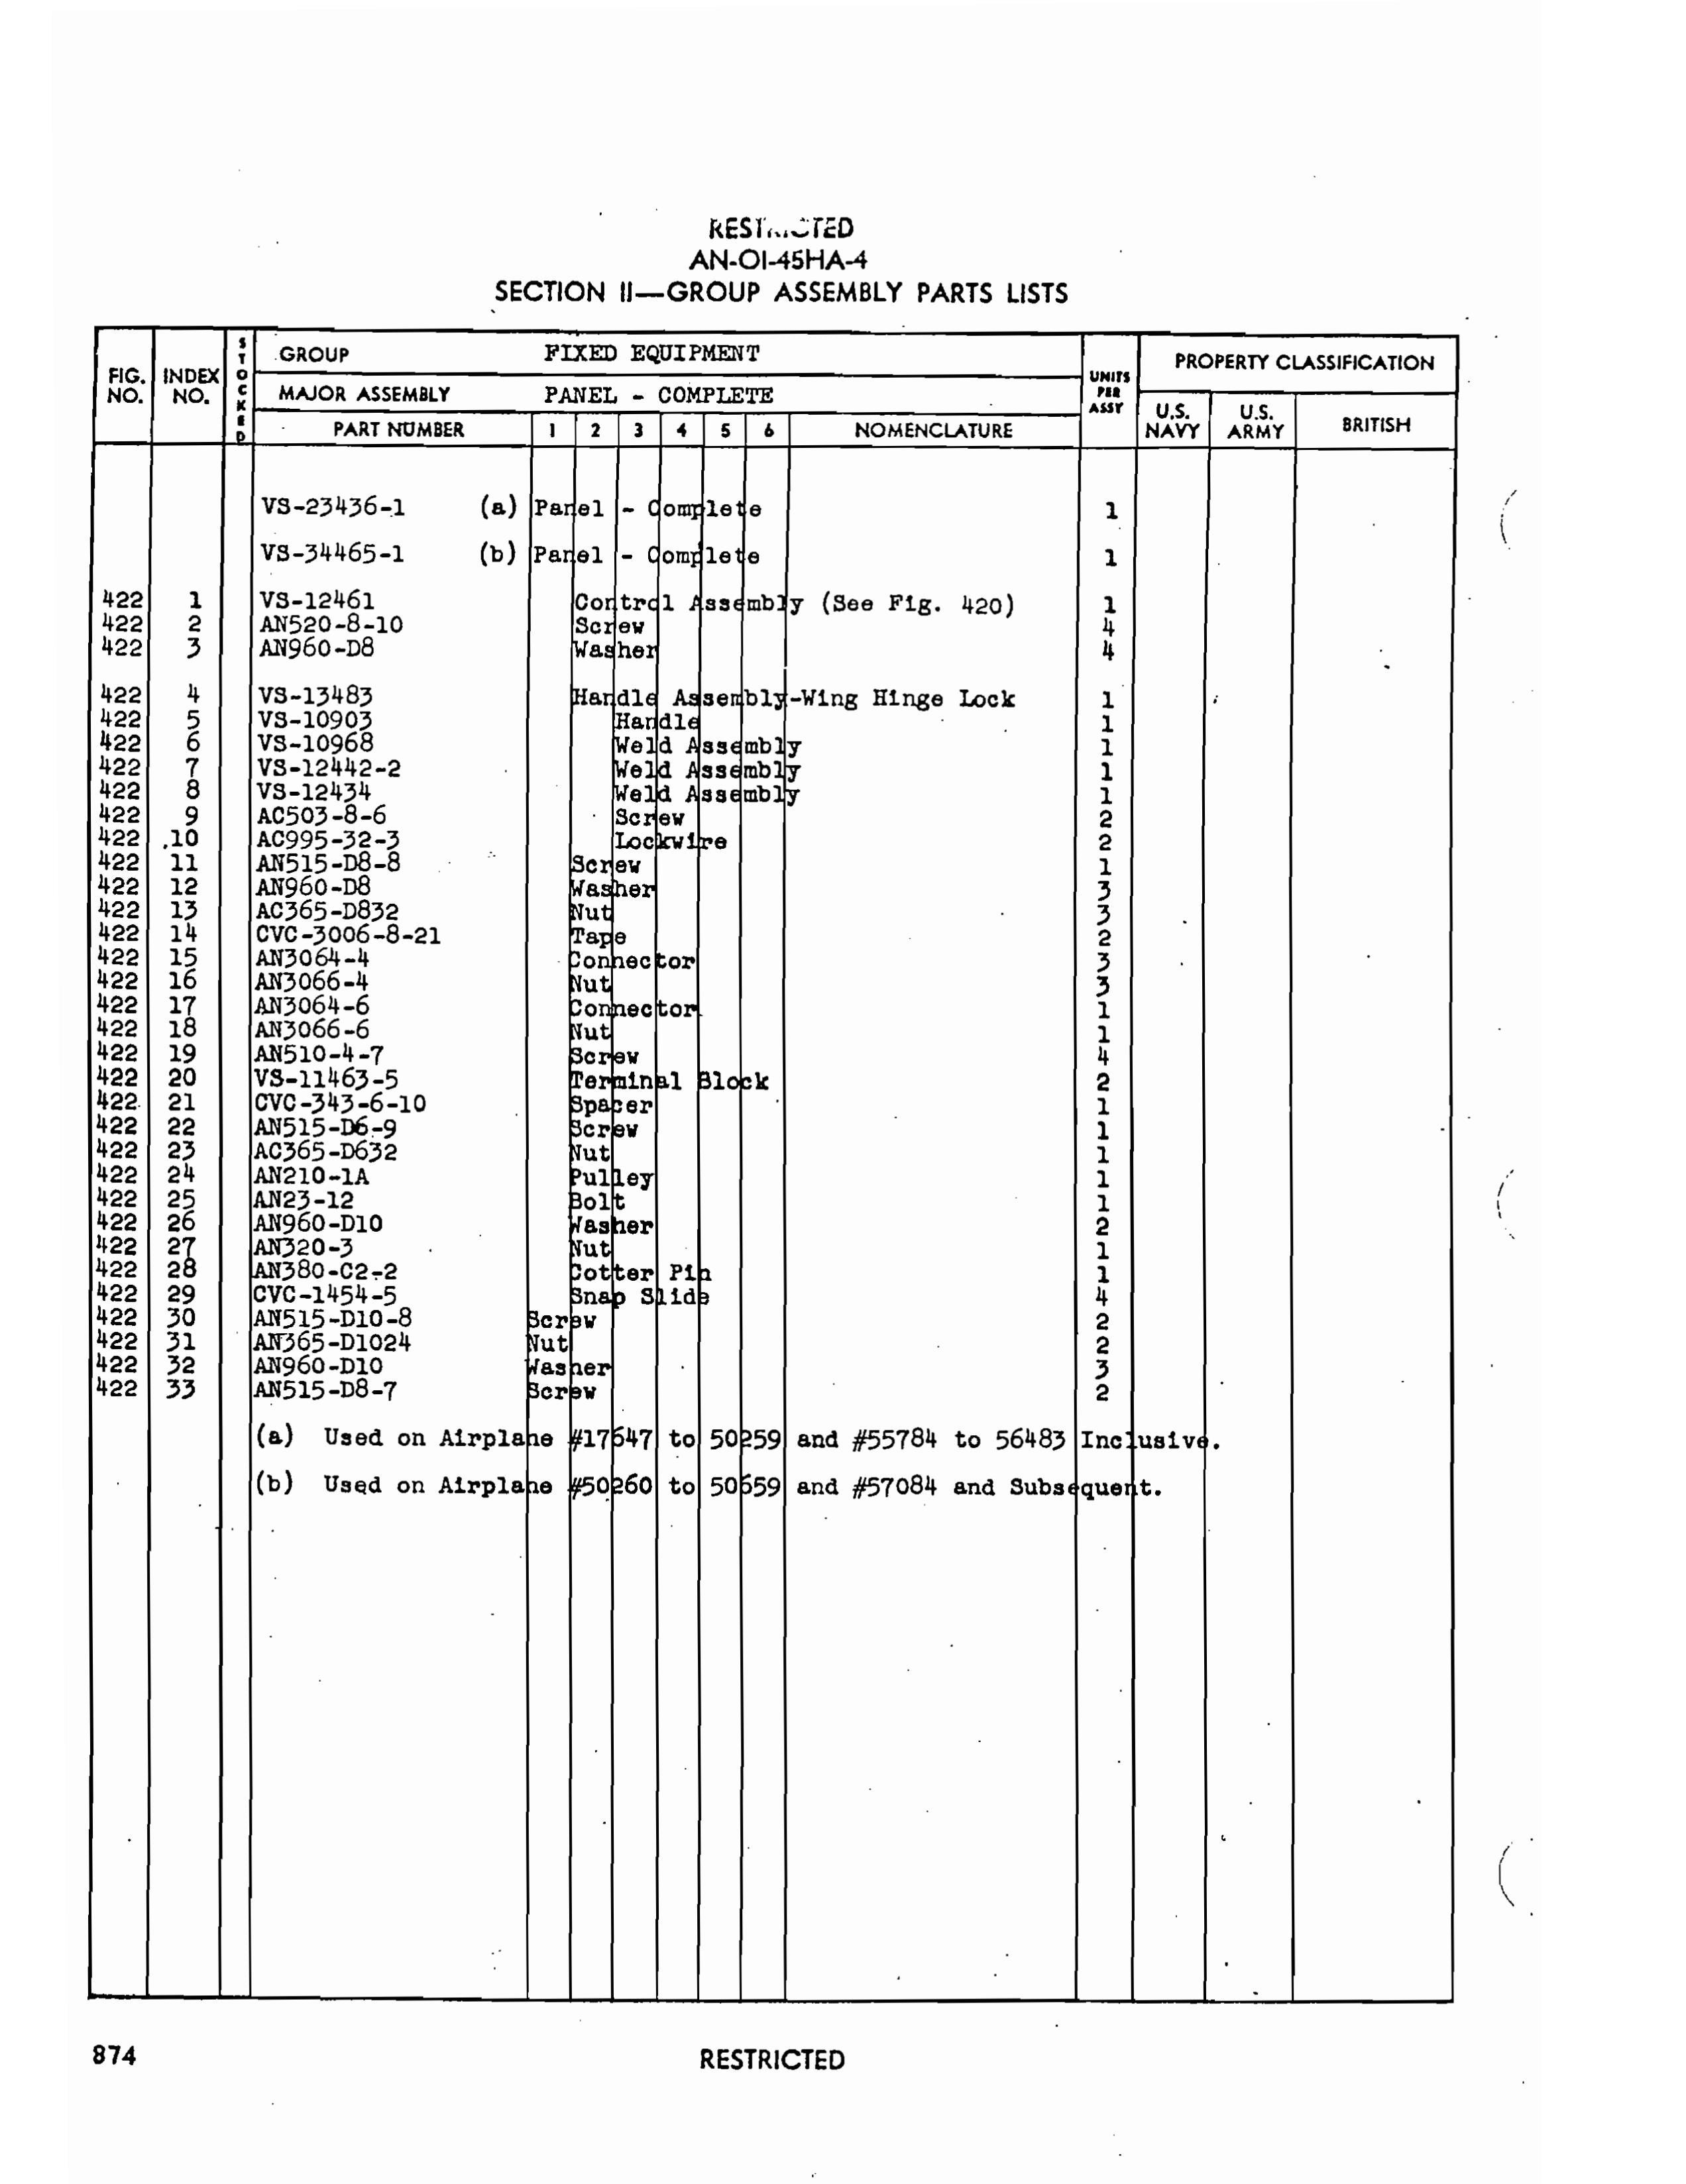 Sample page 905 from AirCorps Library document: Parts Catalog - Corsair